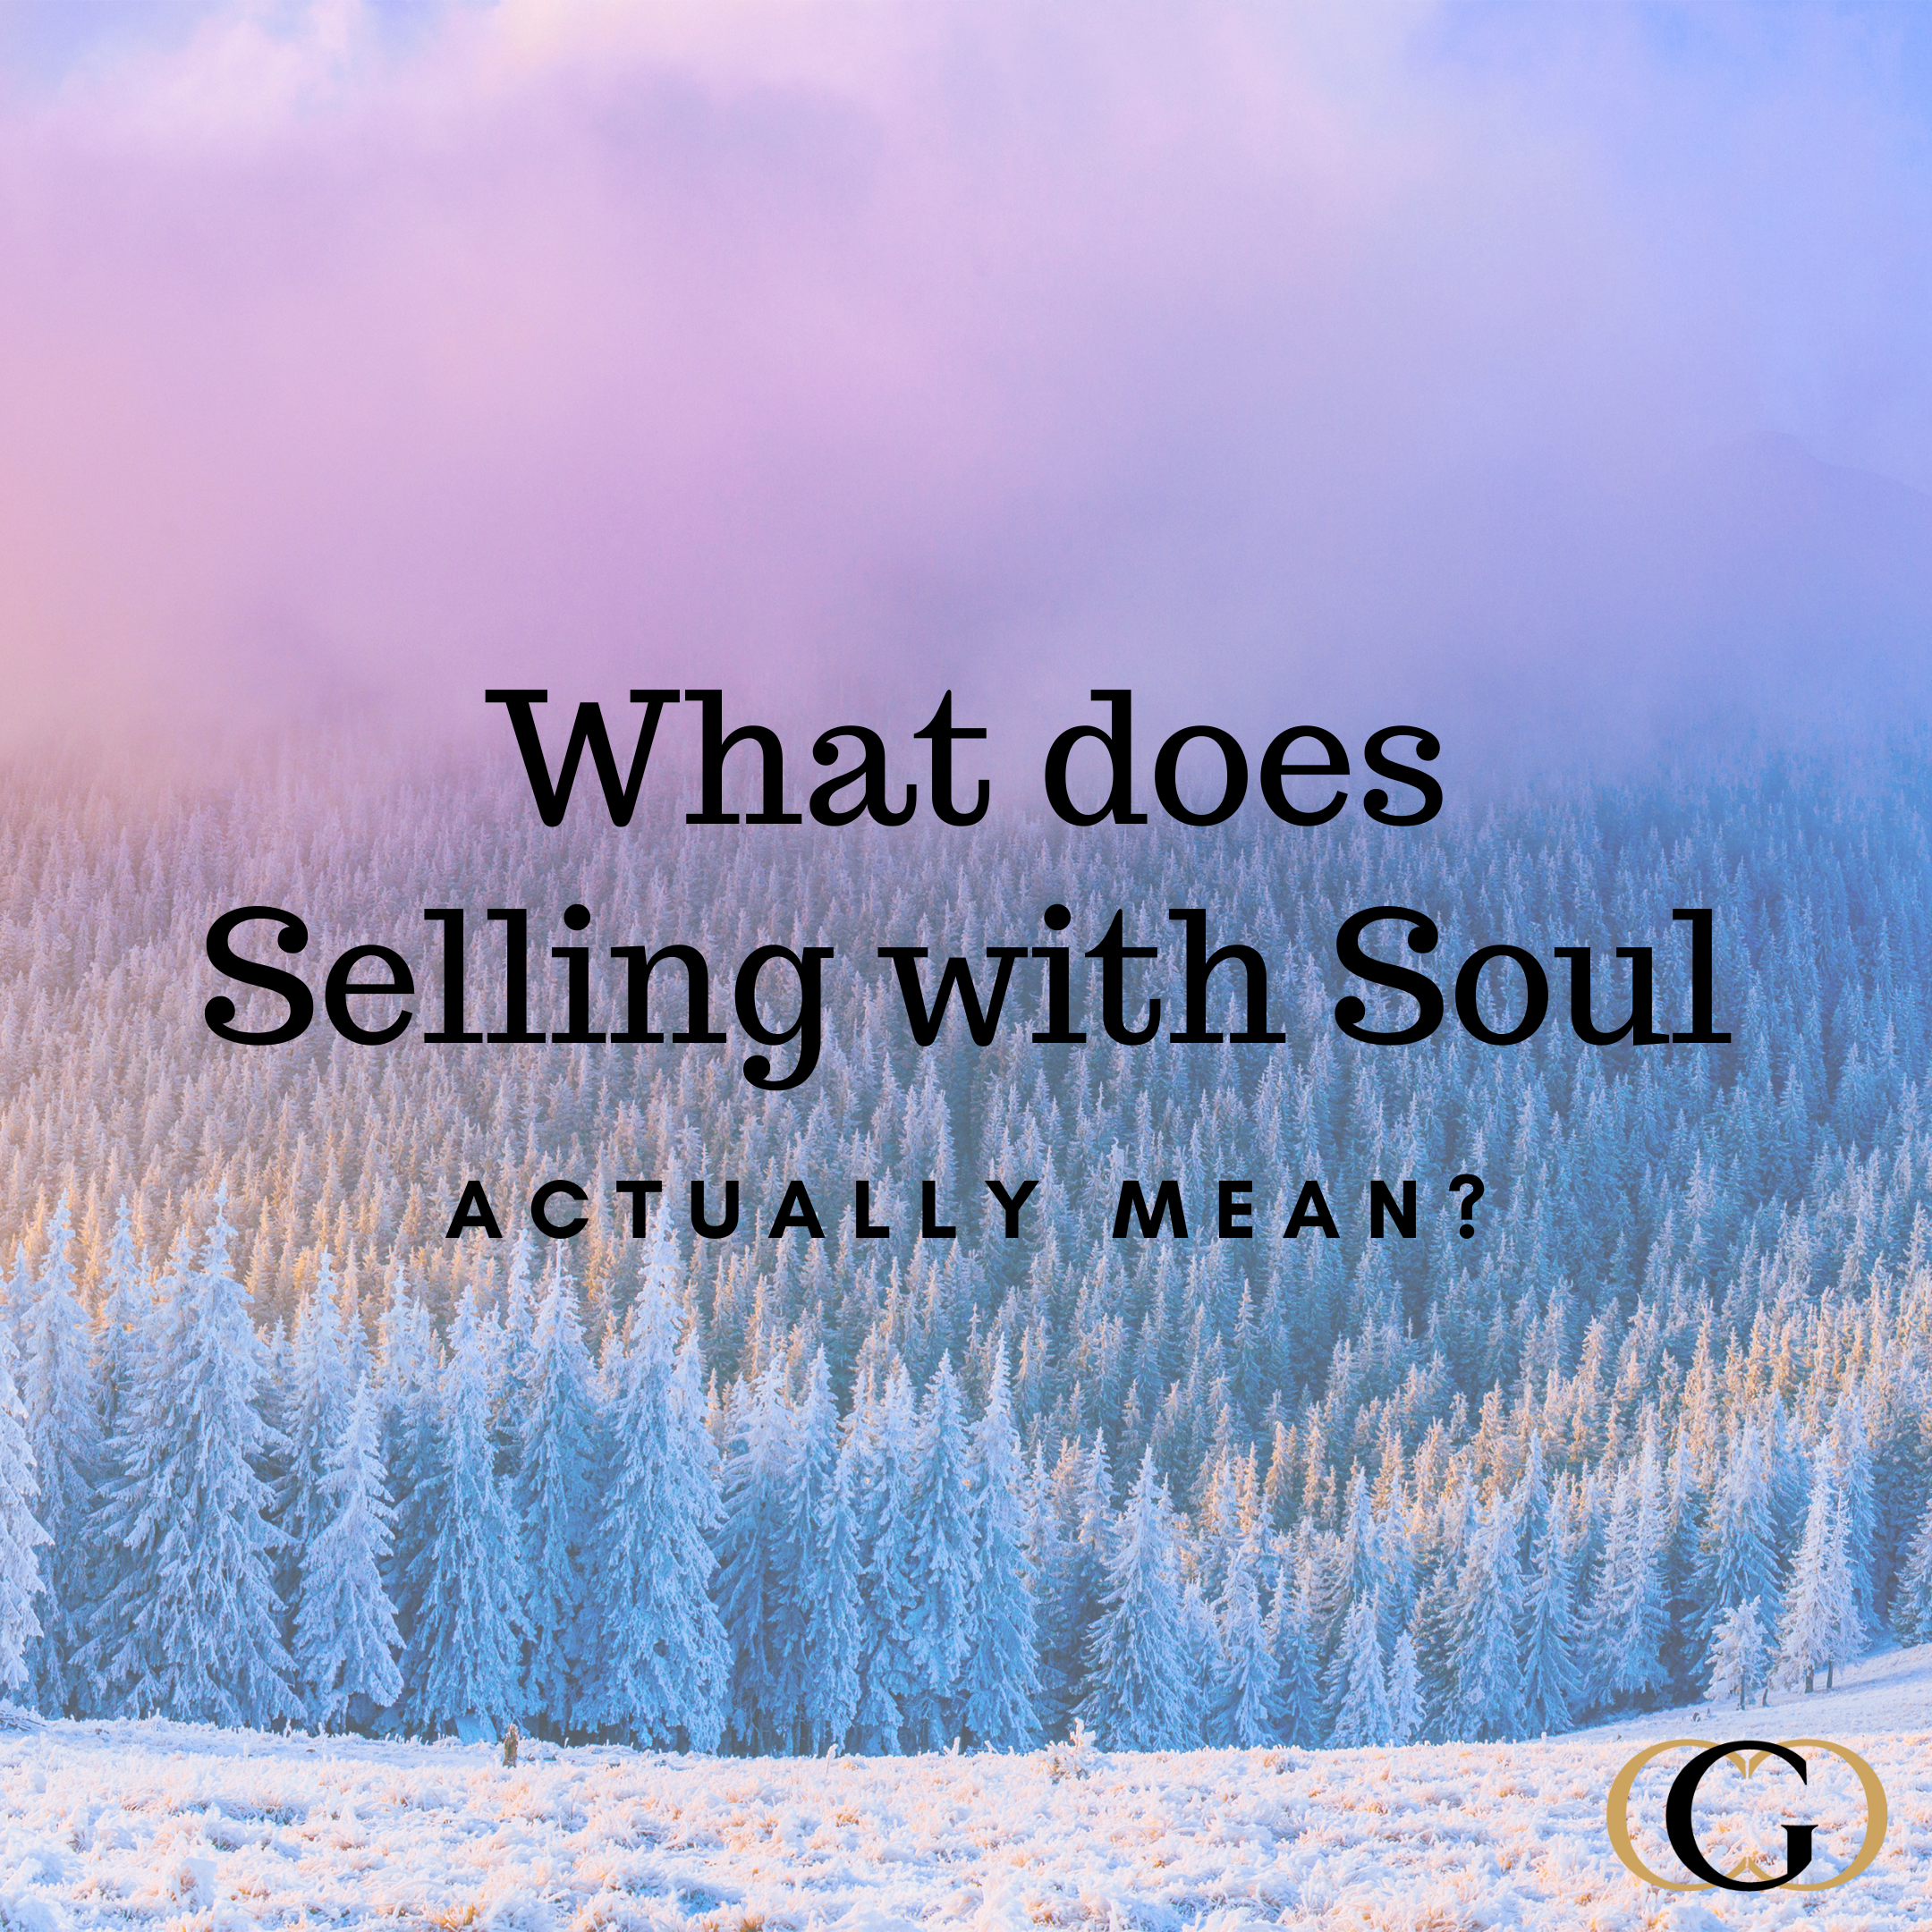 What does selling with soul actually mean?